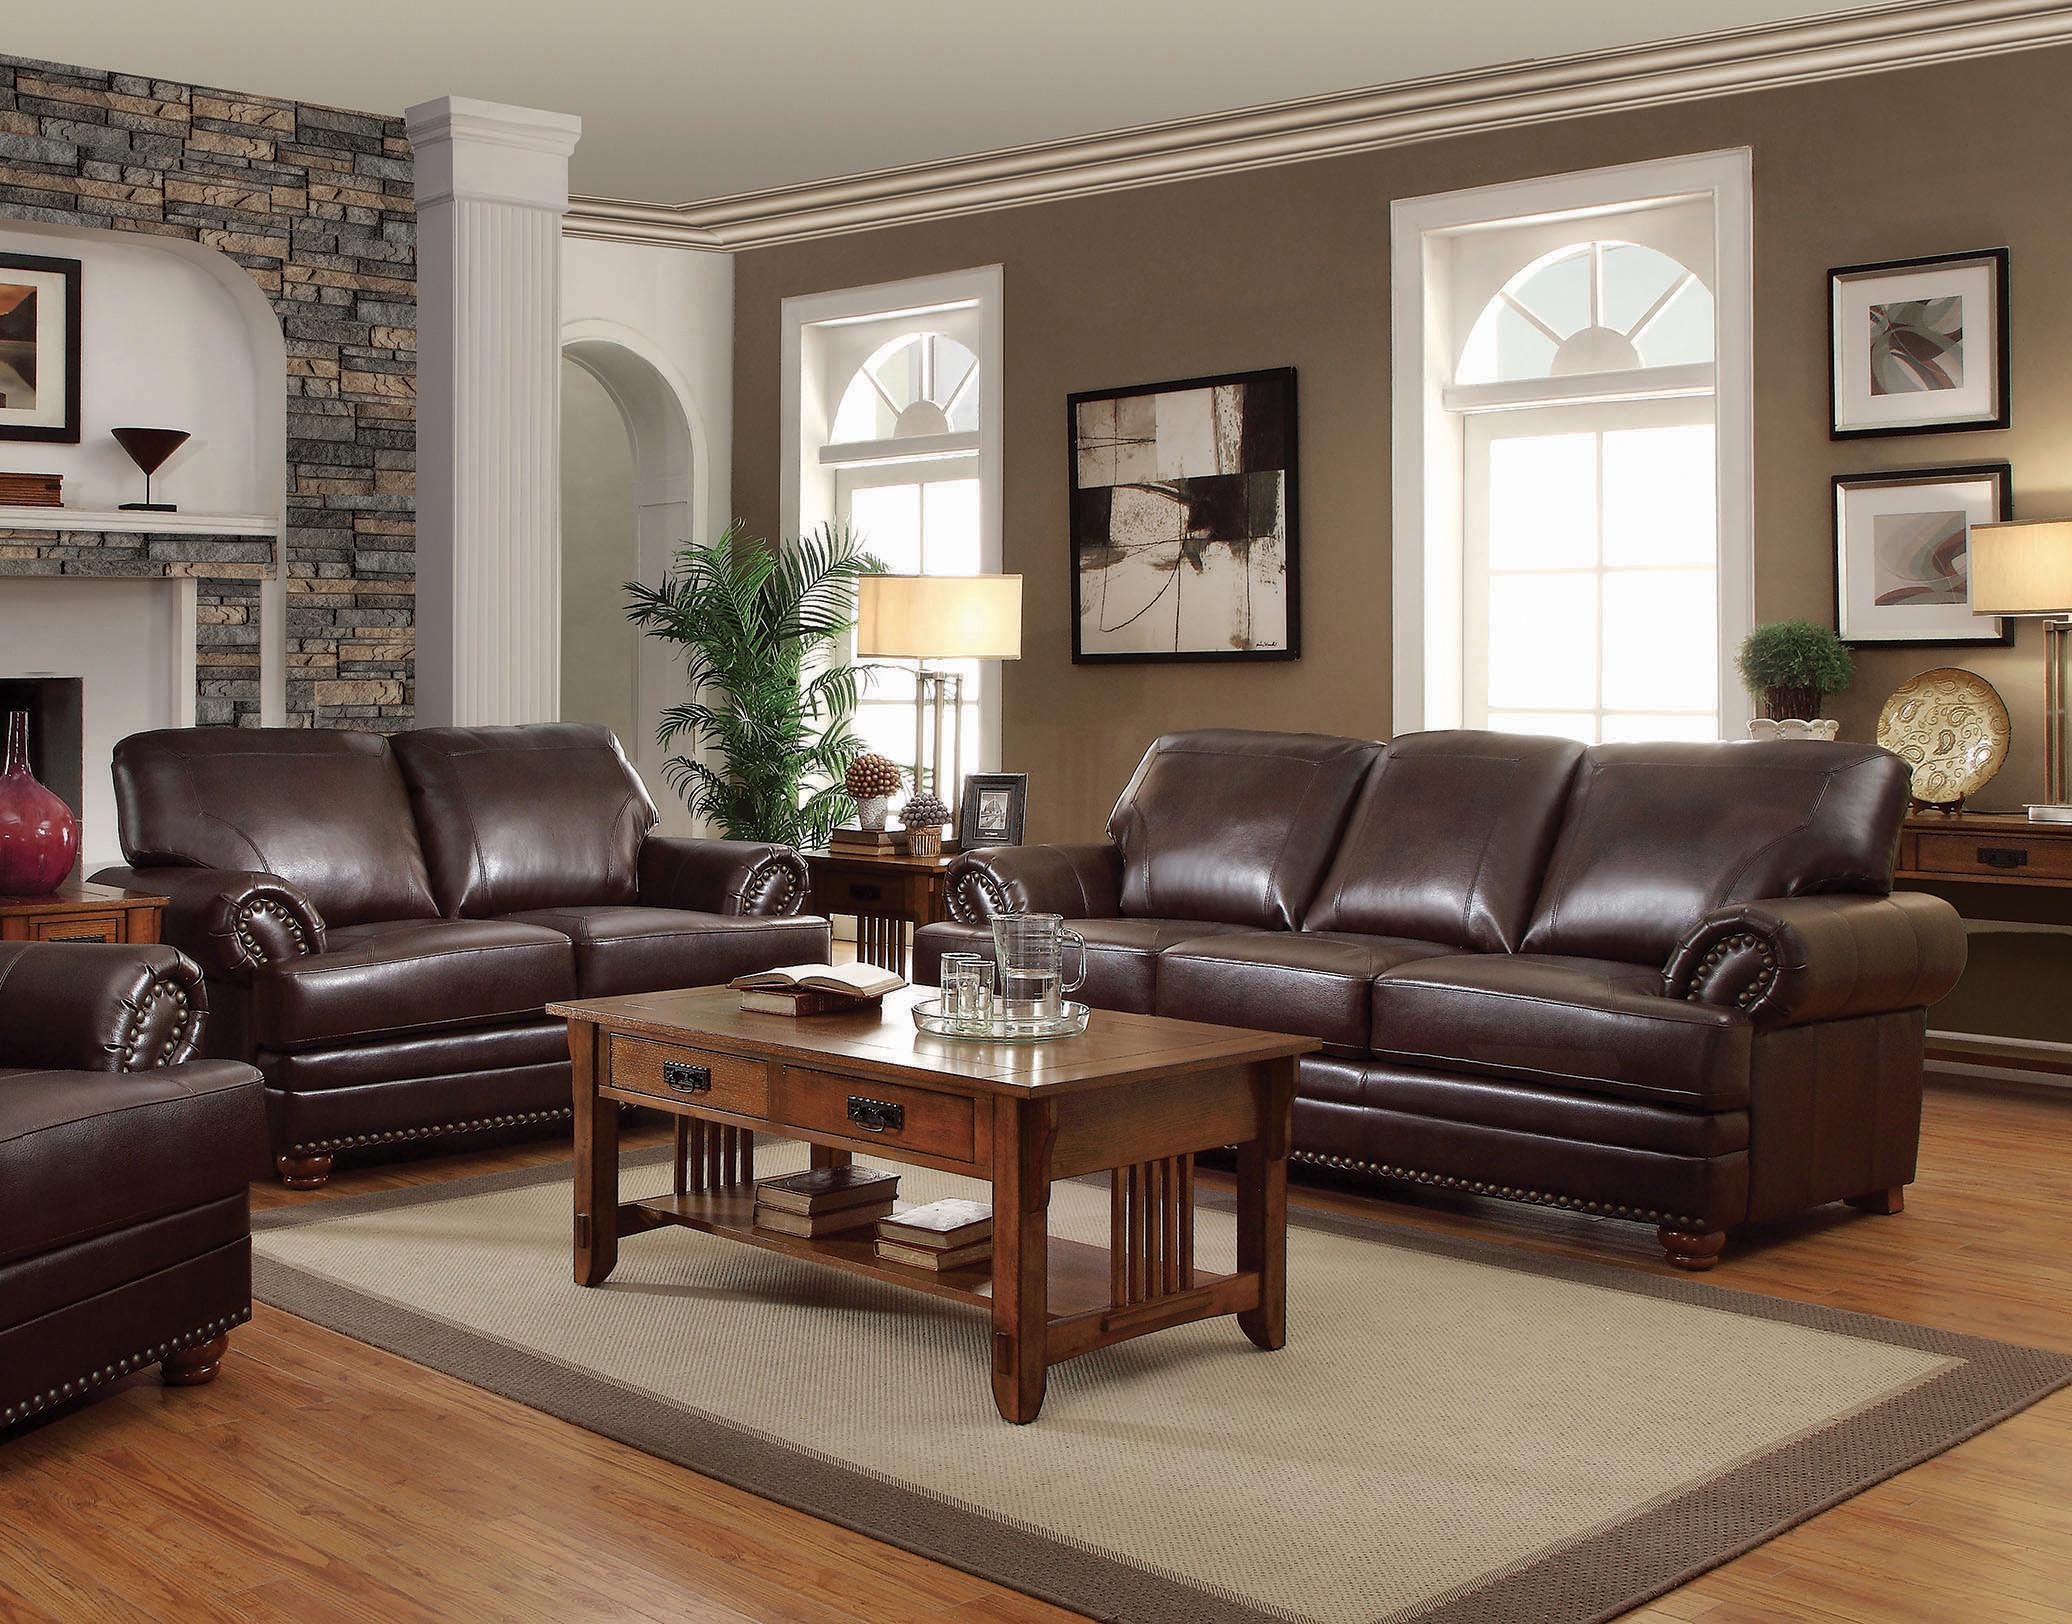 Traditional Living Room Set 504411-S2 Colton 504411-S2 in Brown Leatherette